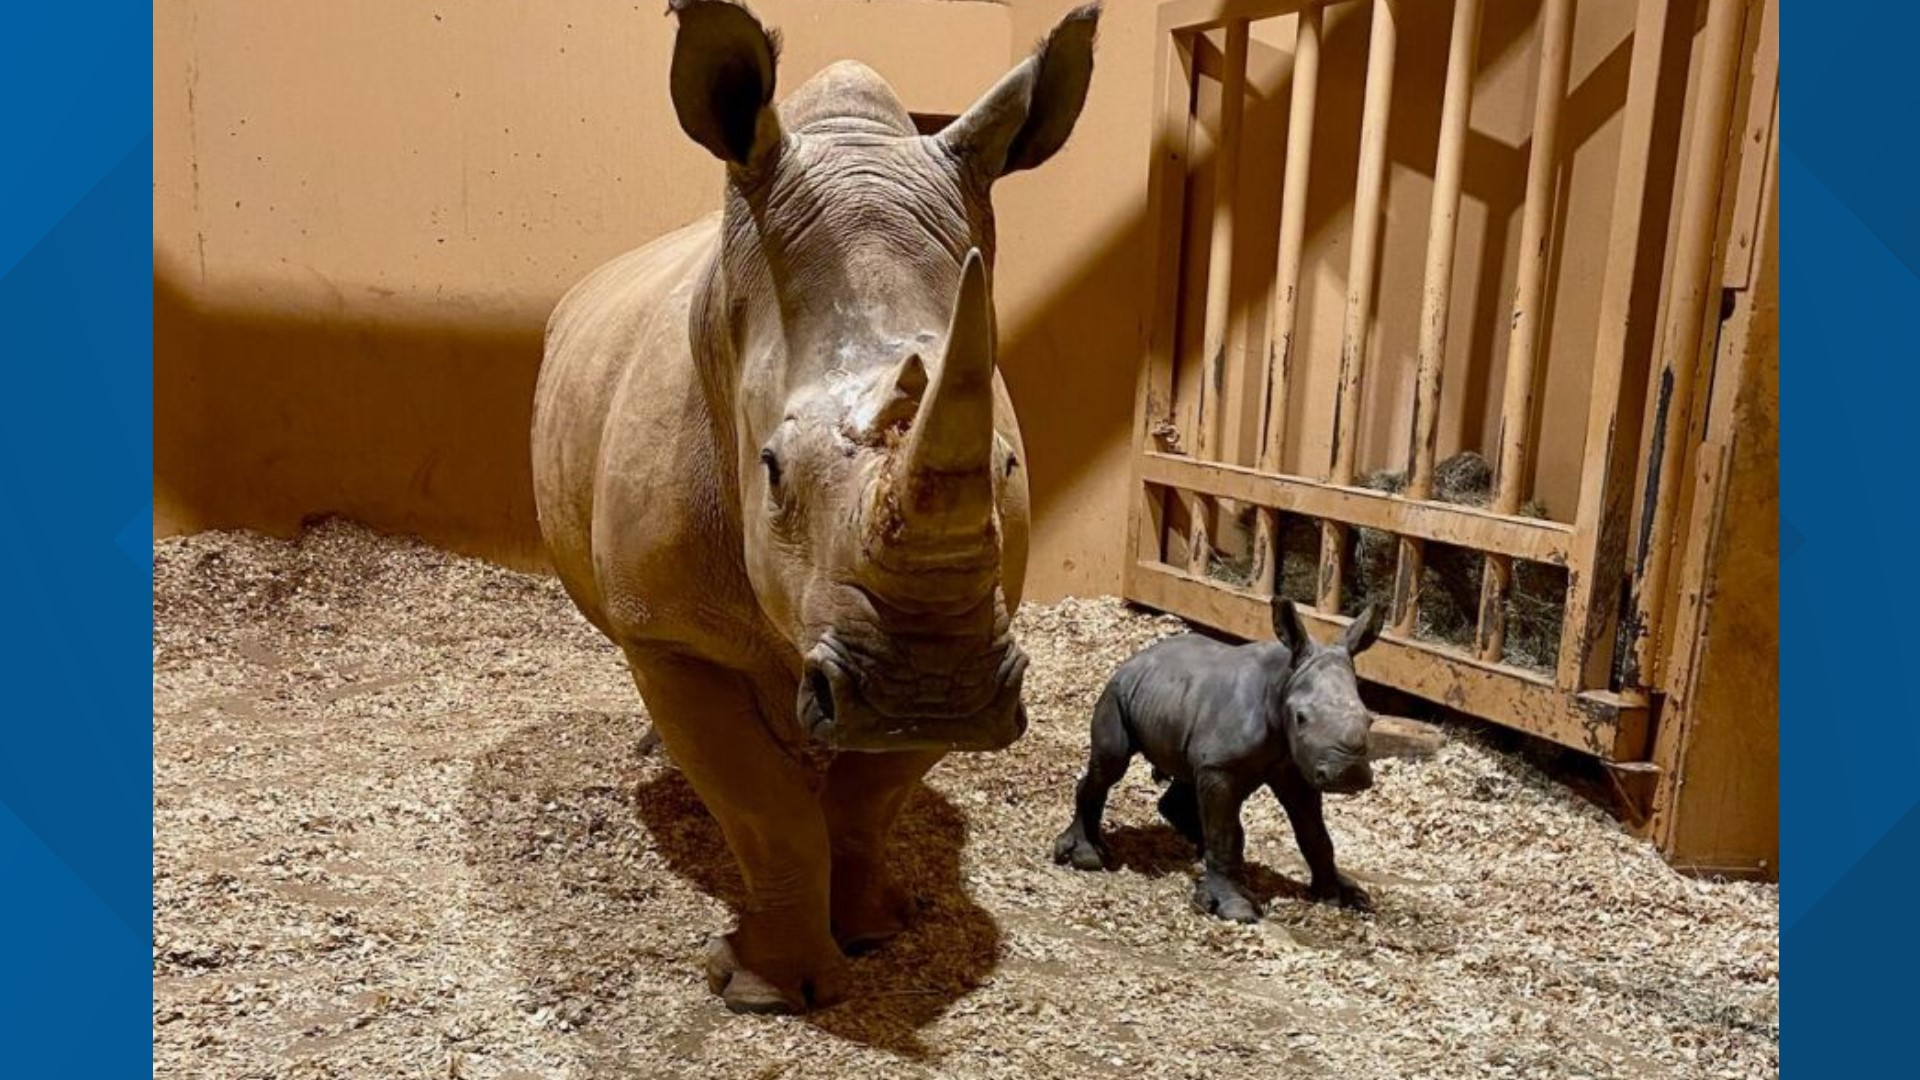 The newborn calf will spend time with it's 22-year-old mother, Kiazi, before entering into the zoo's rhino habitat.